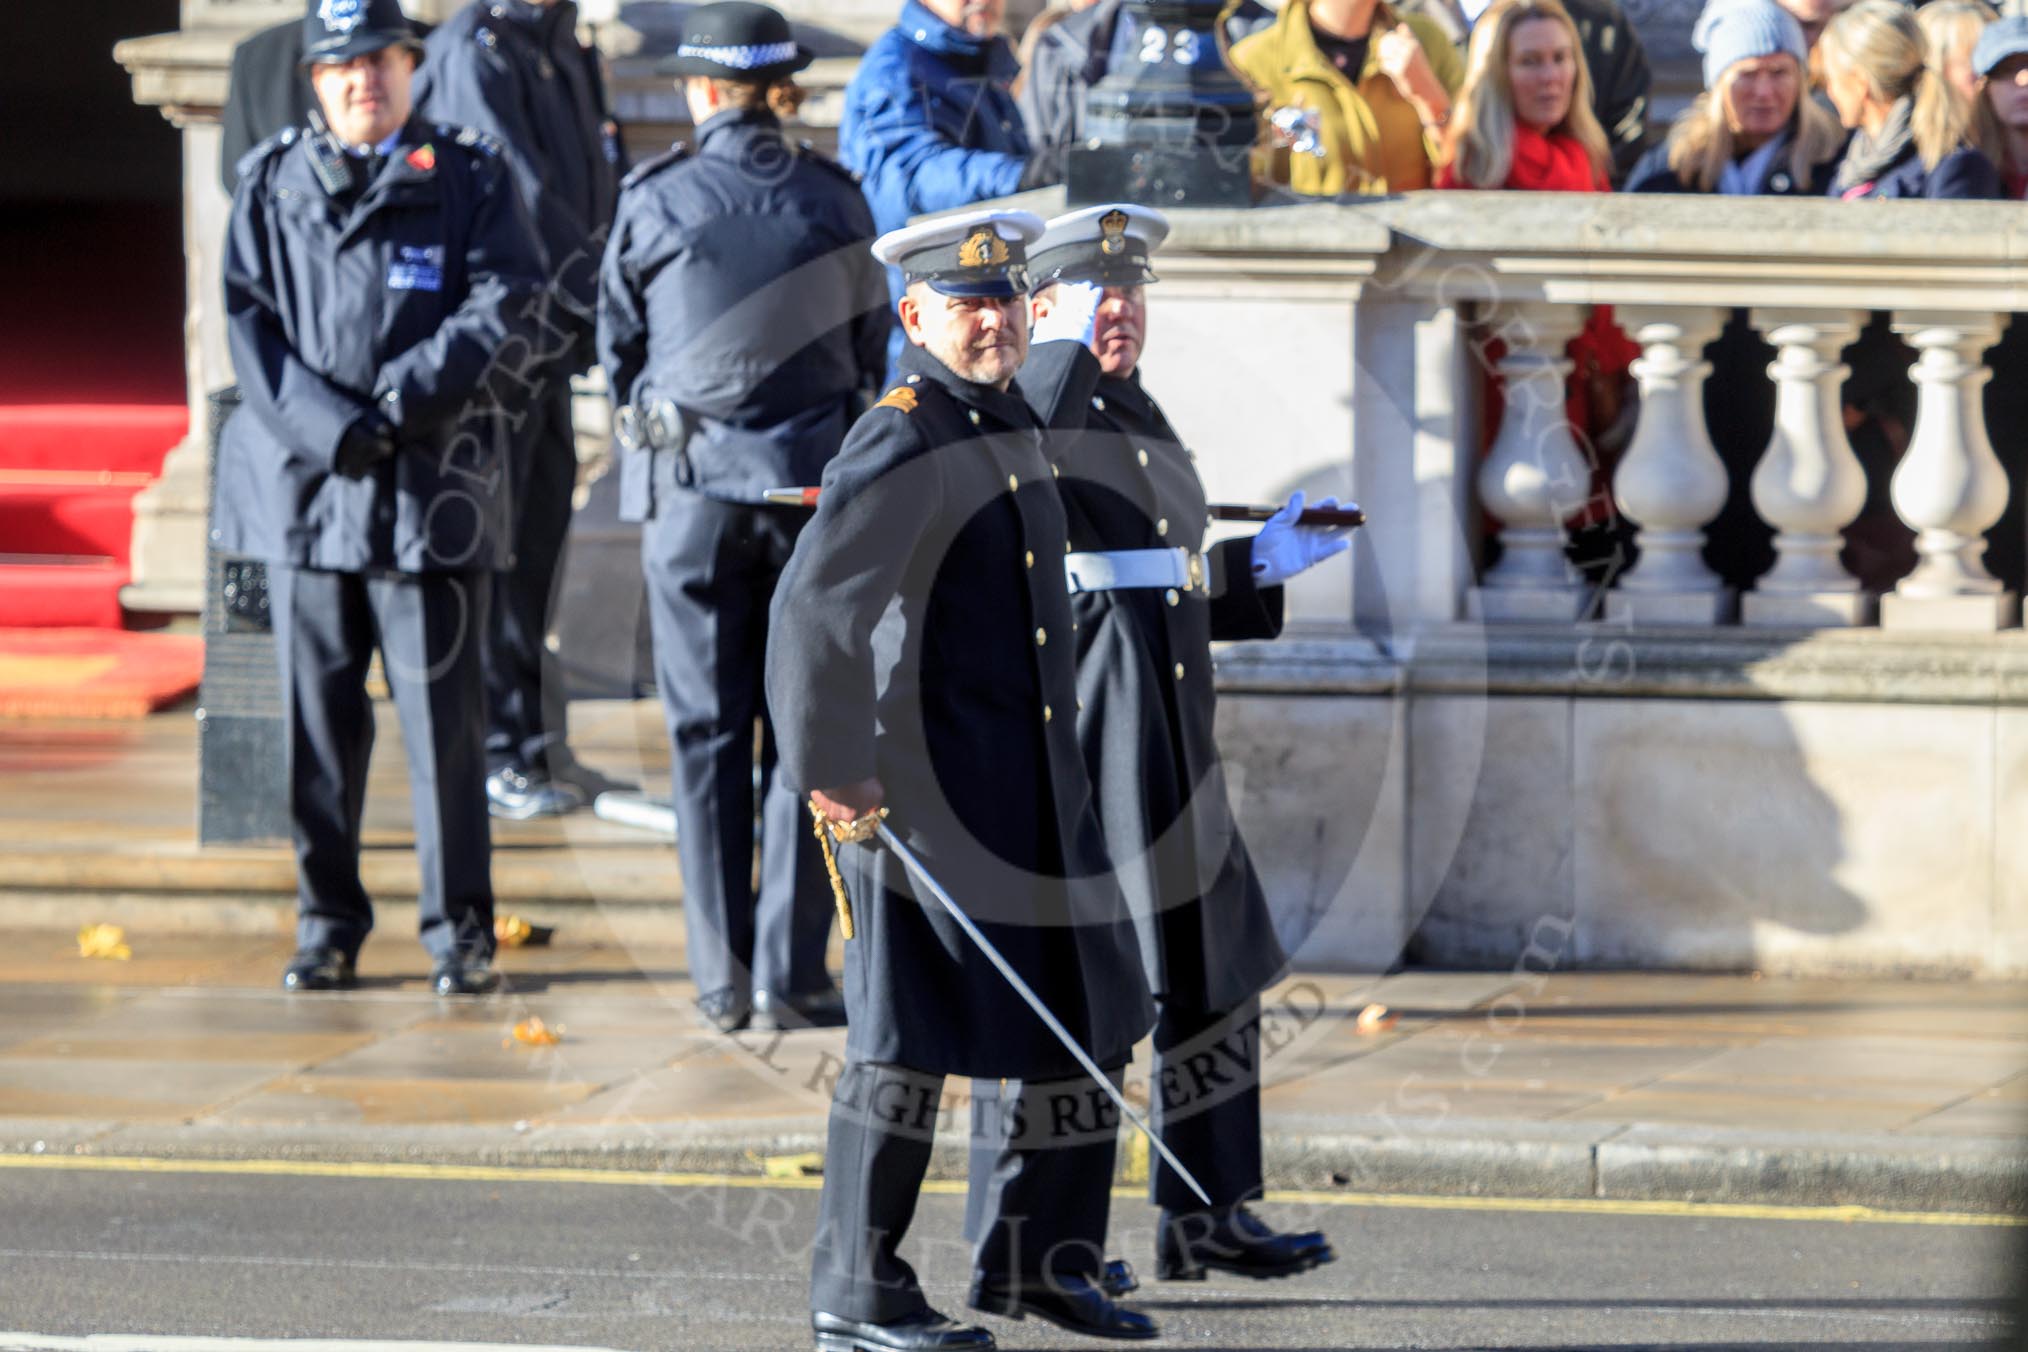 Two Royal Navy officers arriving on Whitehall ahead of their service detachment, before the Remembrance Sunday Cenotaph Ceremony 2018 at Horse Guards Parade, Westminster, London, 11 November 2018, 10:07.